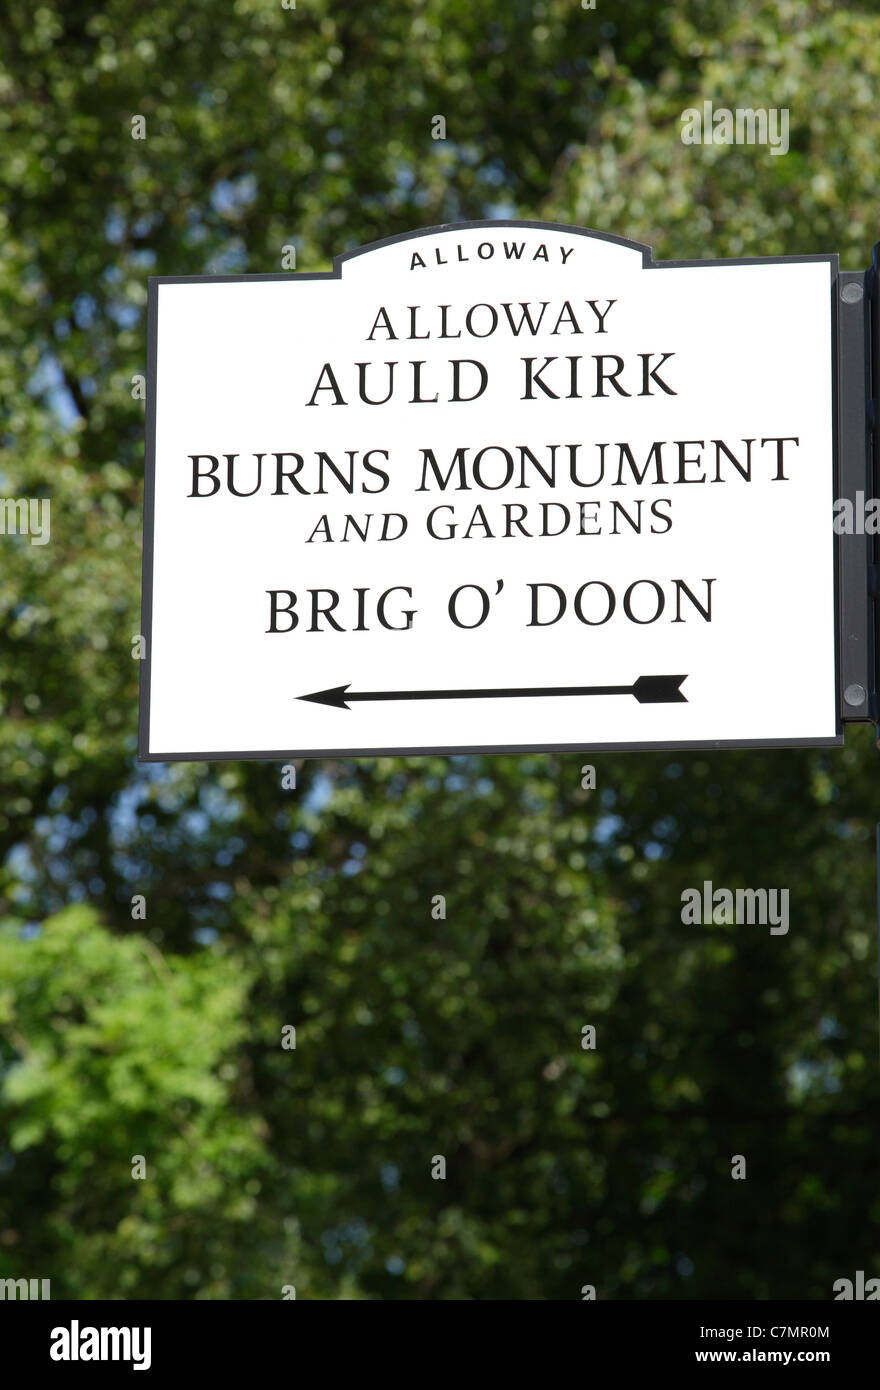 Direction sign to Alloway Auld Kirk, Robert Burns Monument and Gardens and Brig O' Doon, Alloway, South Ayrshire, Scotland, UK Stock Photo